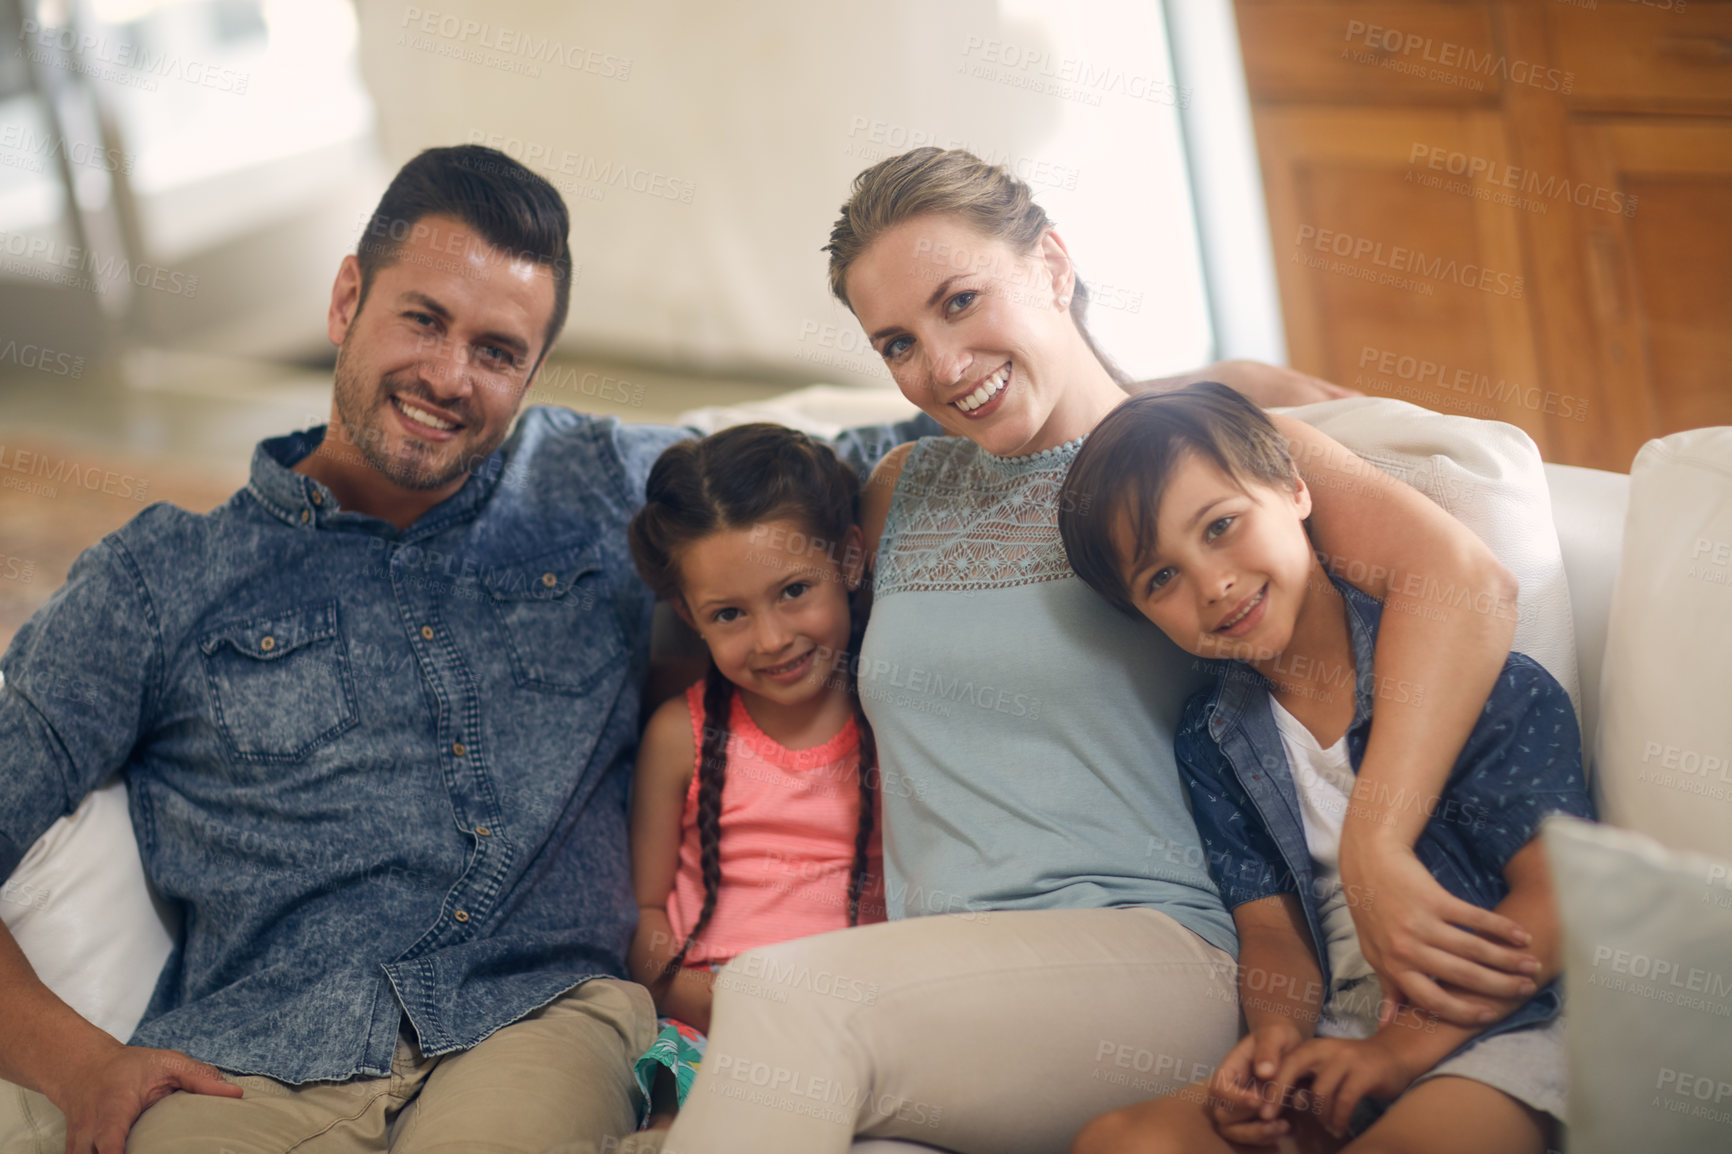 Buy stock photo Shot of a family of four spending quality time together at home